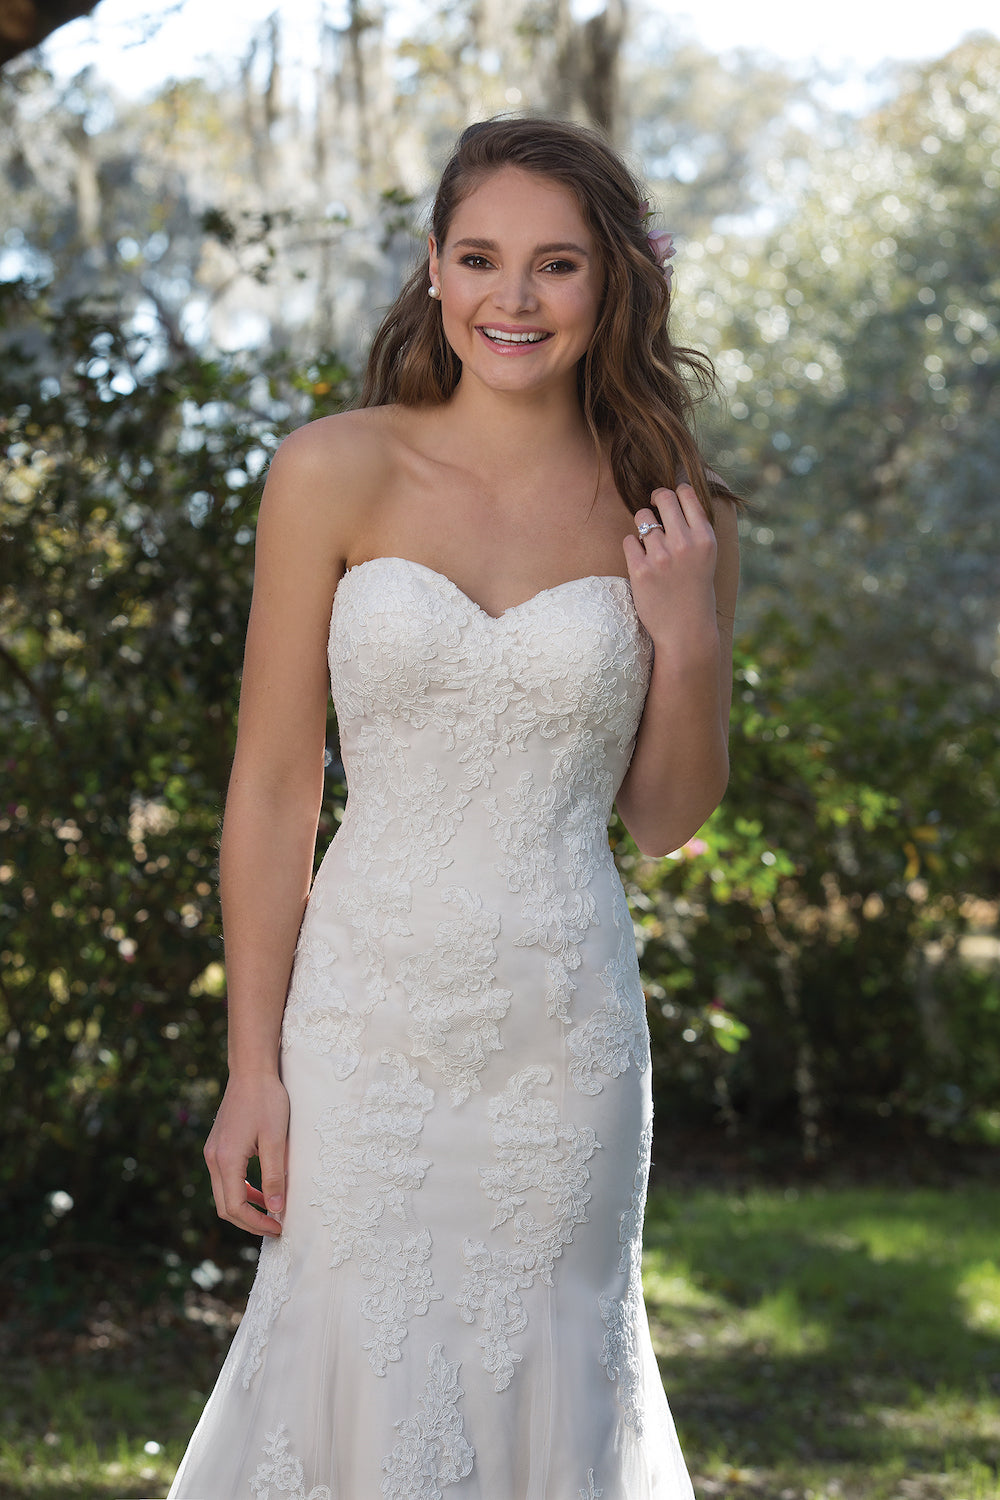 Lace Strapless Neckline Fit & Flair Gown with Stunning Lace Hem - #6167